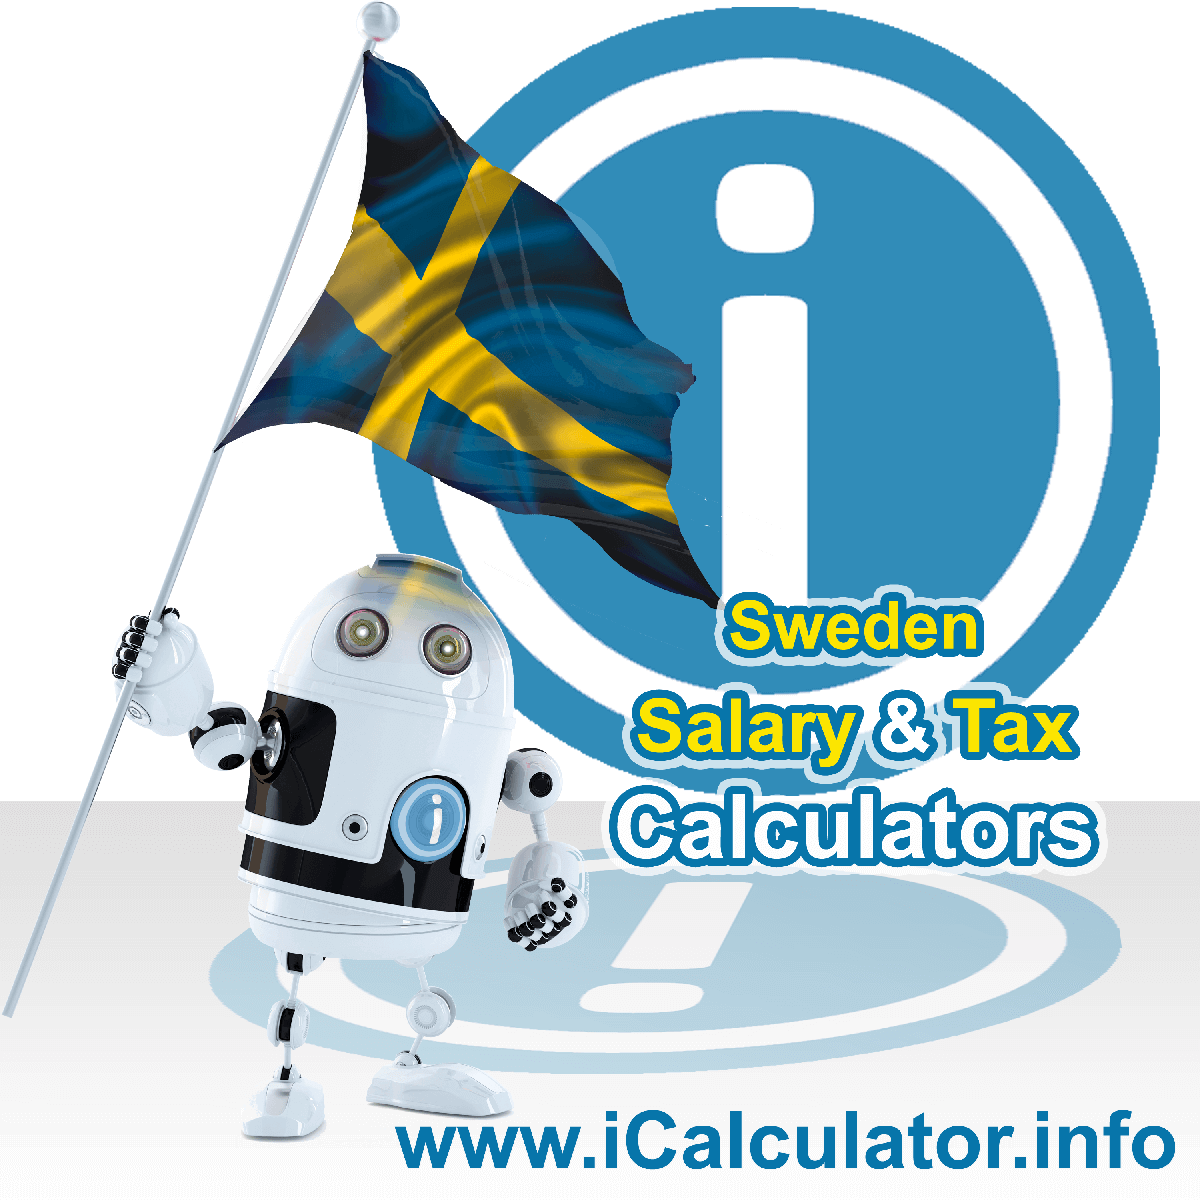 Sweden Tax Calculator. This image shows the Sweden flag and information relating to the tax formula for the Sweden Salary Calculator